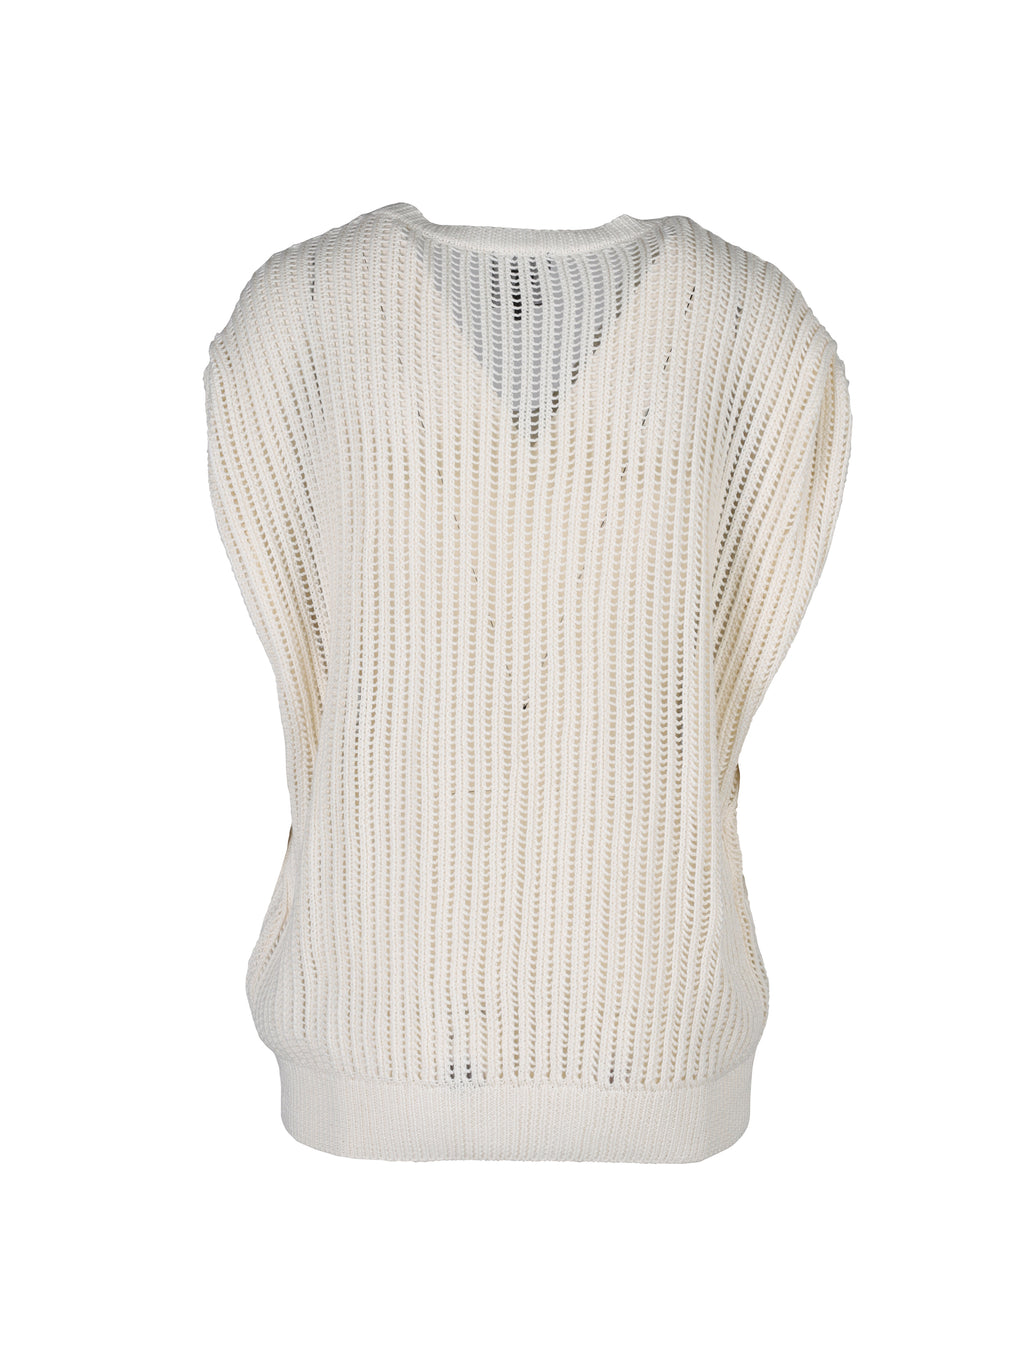 TOLOU knitted top with v-neck - Creme